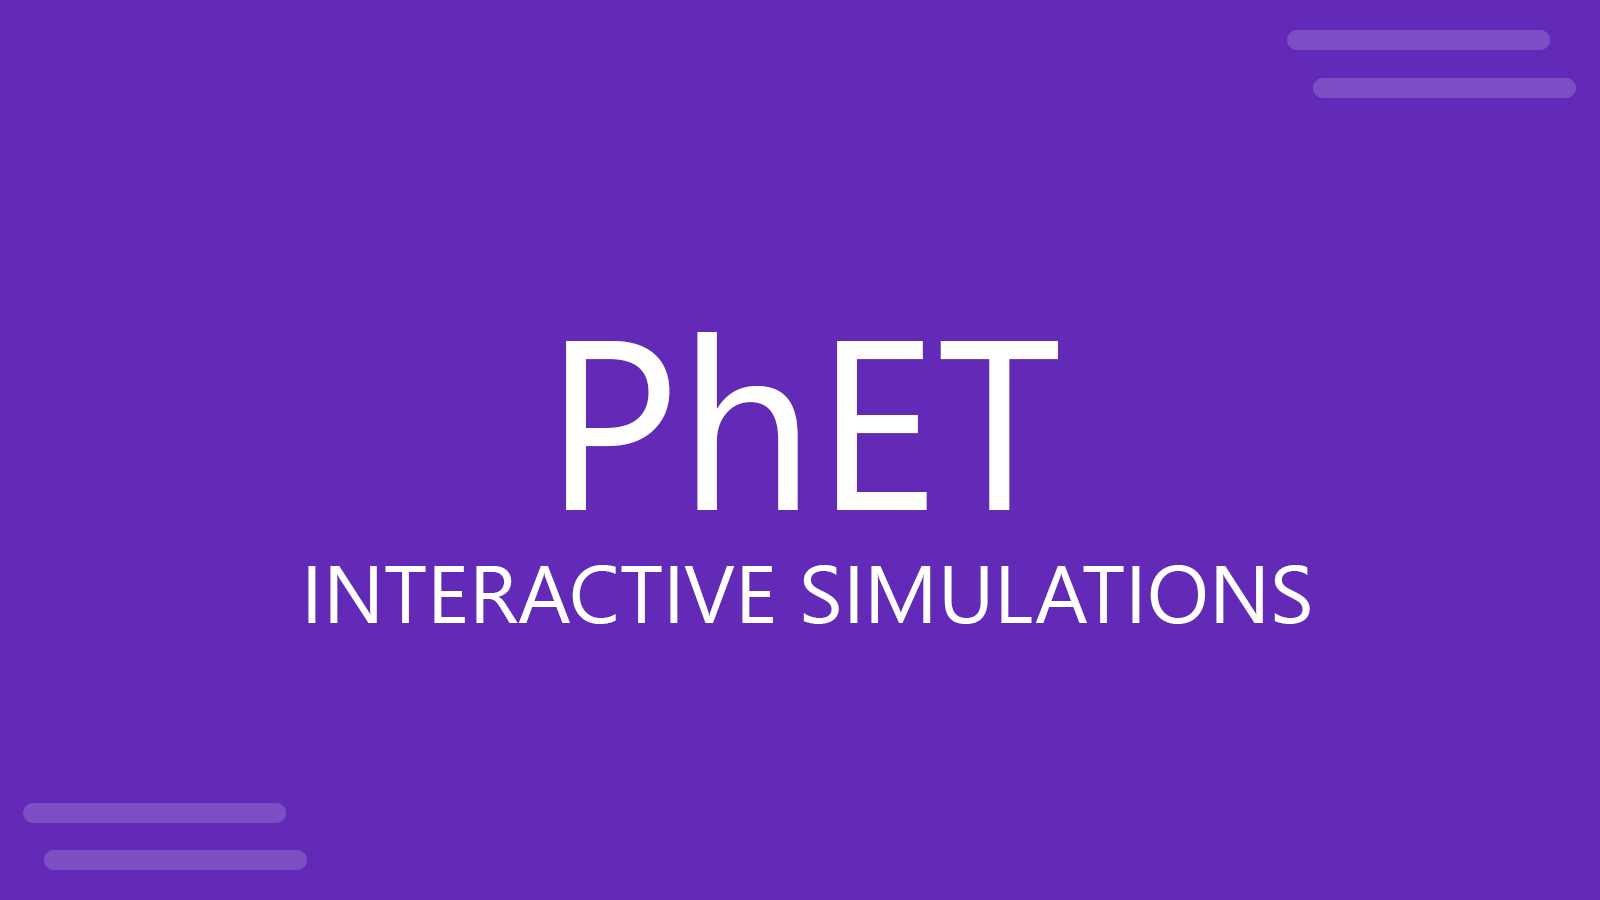 PhET Simulations Bring Interactive Scientific Learning for Students